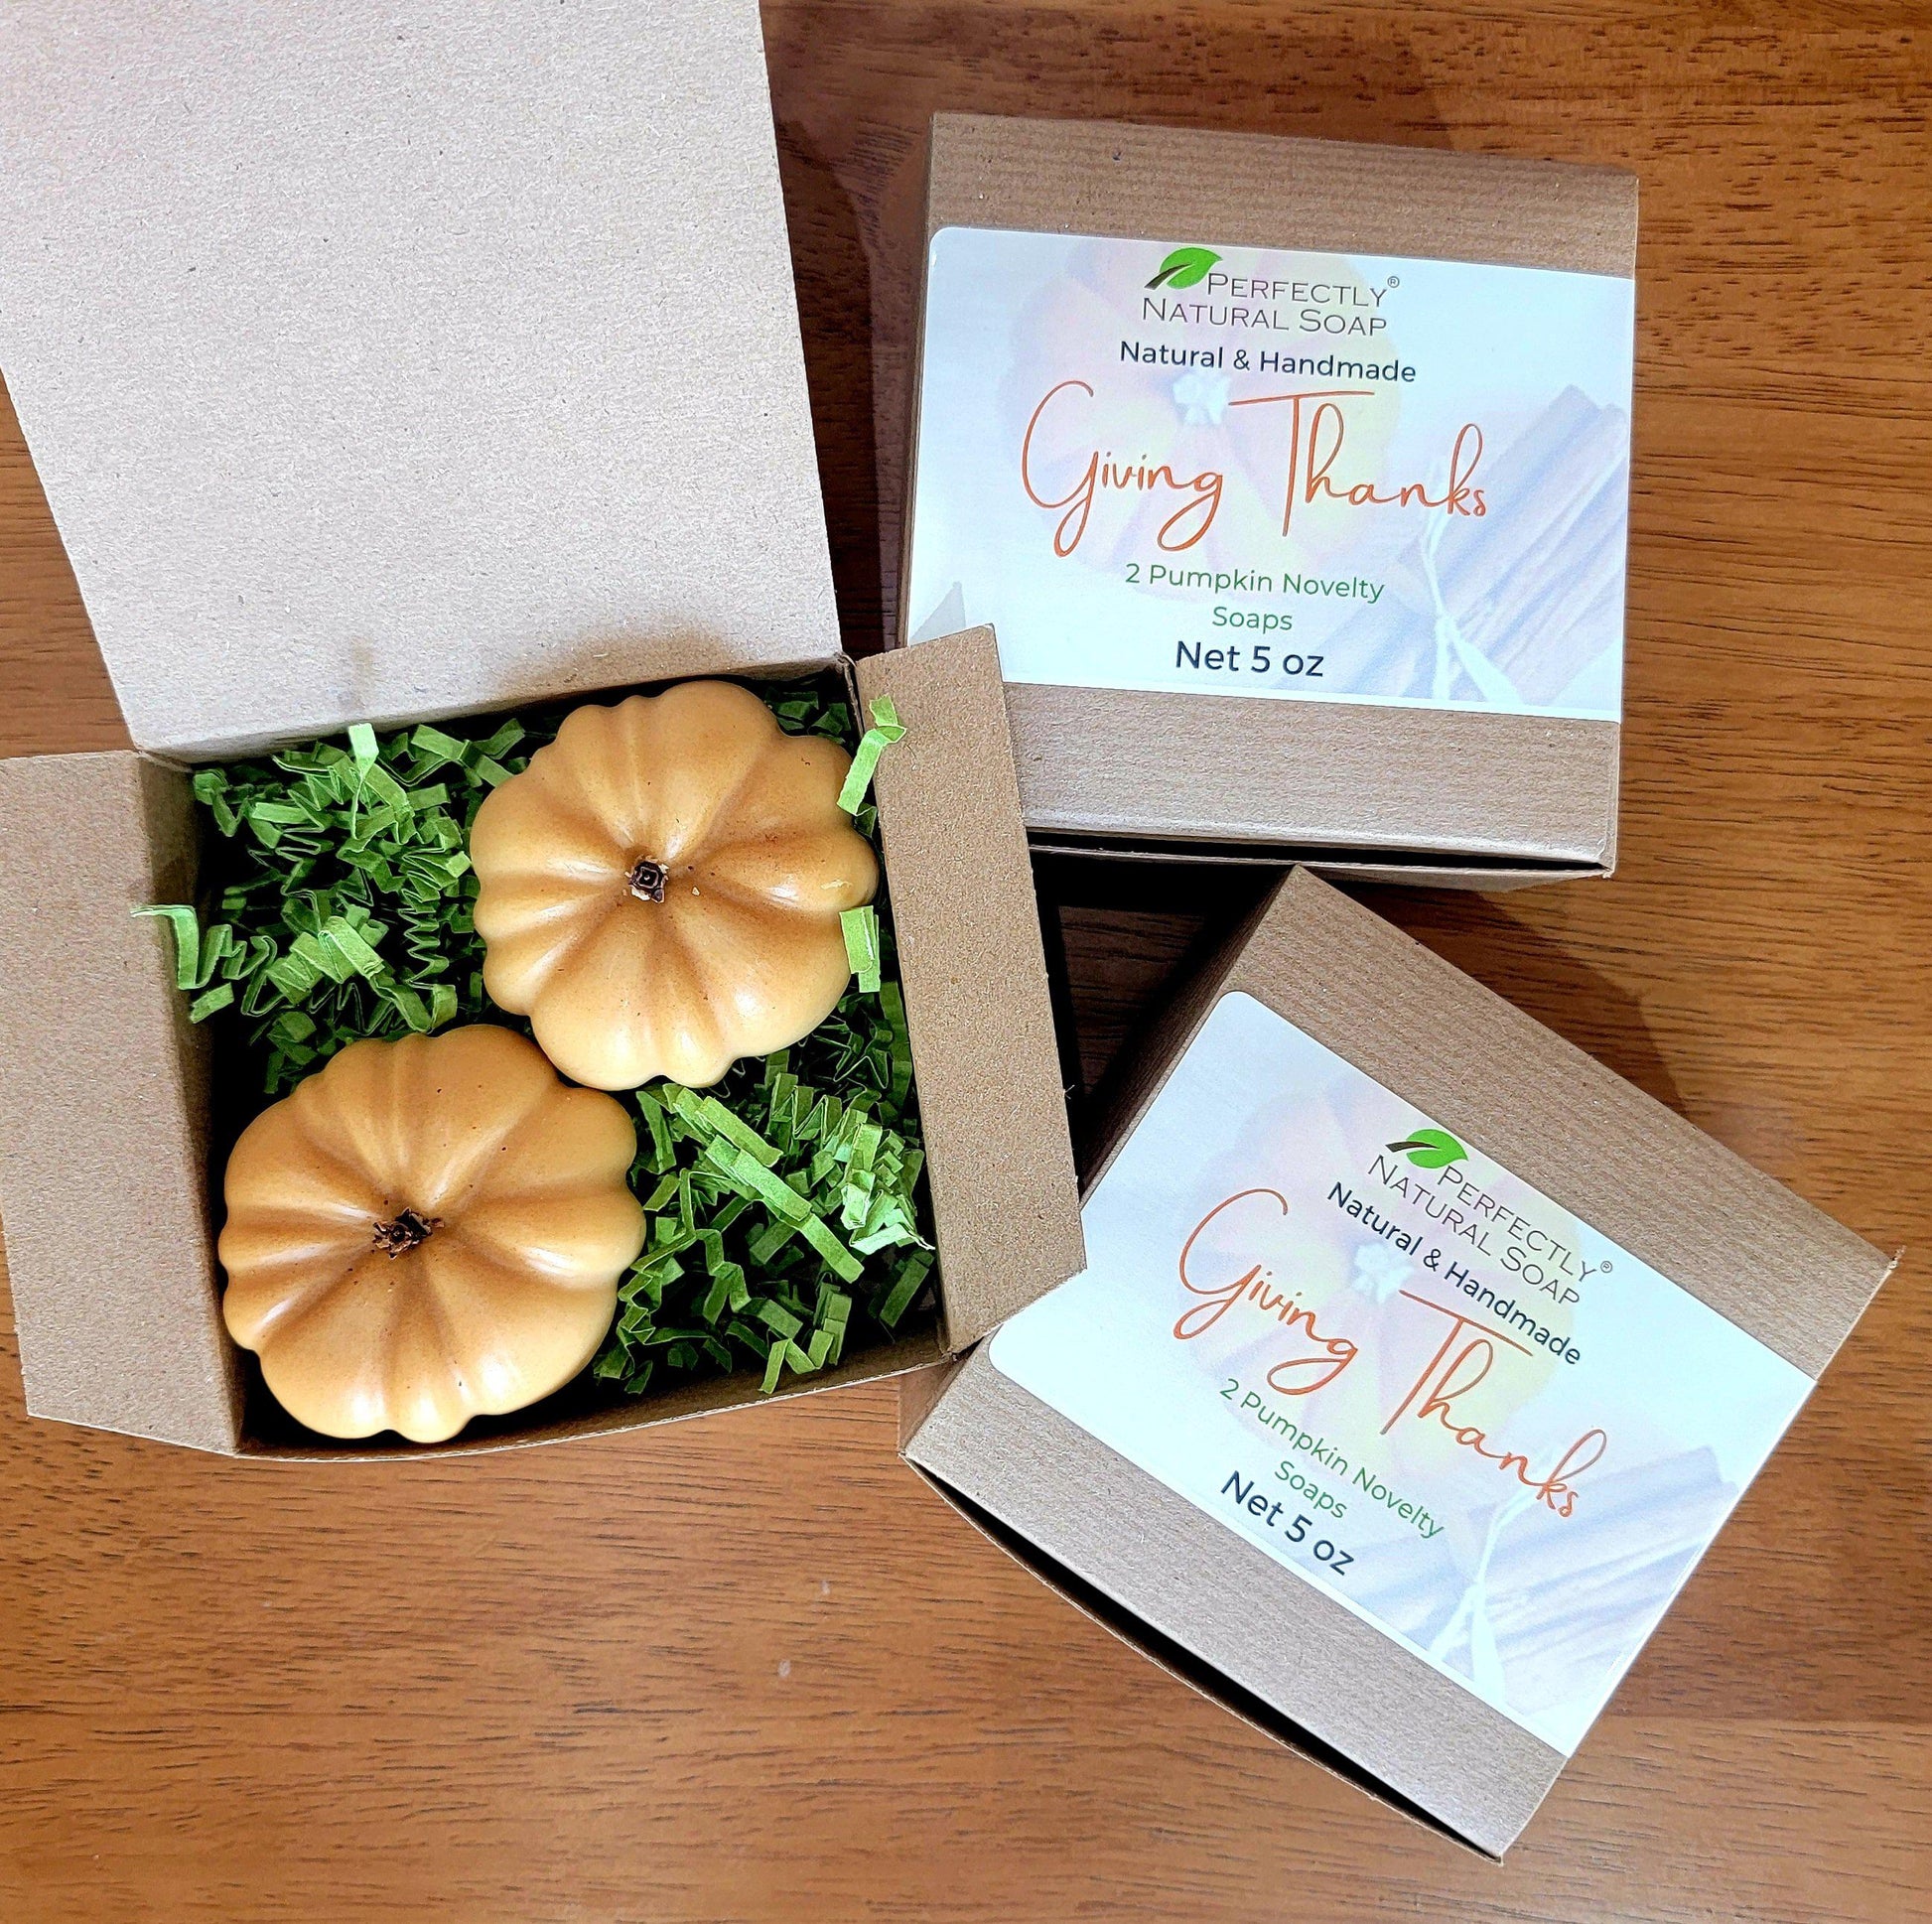 Pumpkin Soaps - Giving Thanks Box-Gift Sets / Certificates-Perfectly Natural Soap